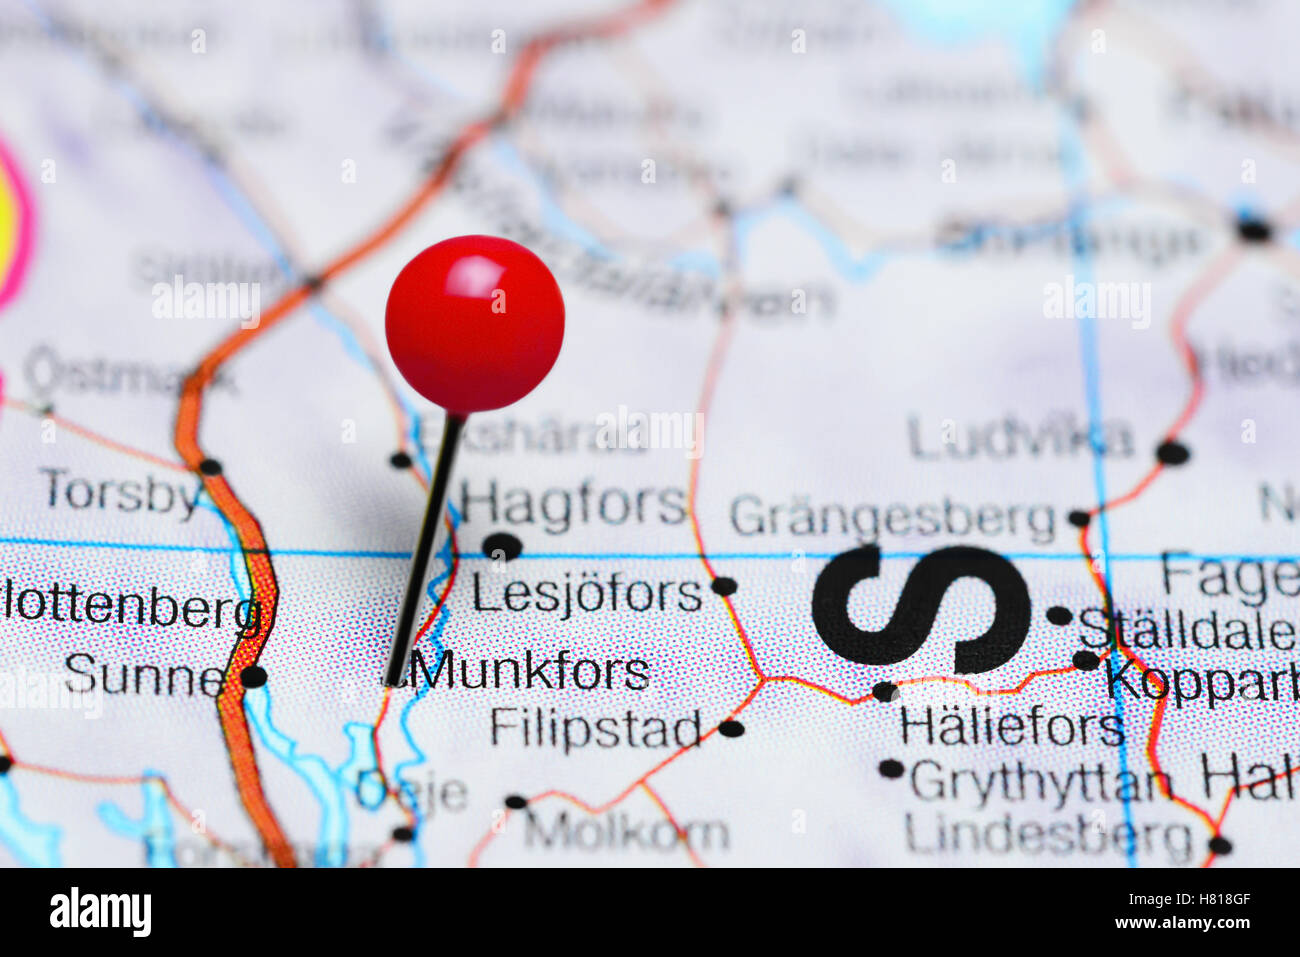 Munkfors pinned on a map of Sweden Stock Photo